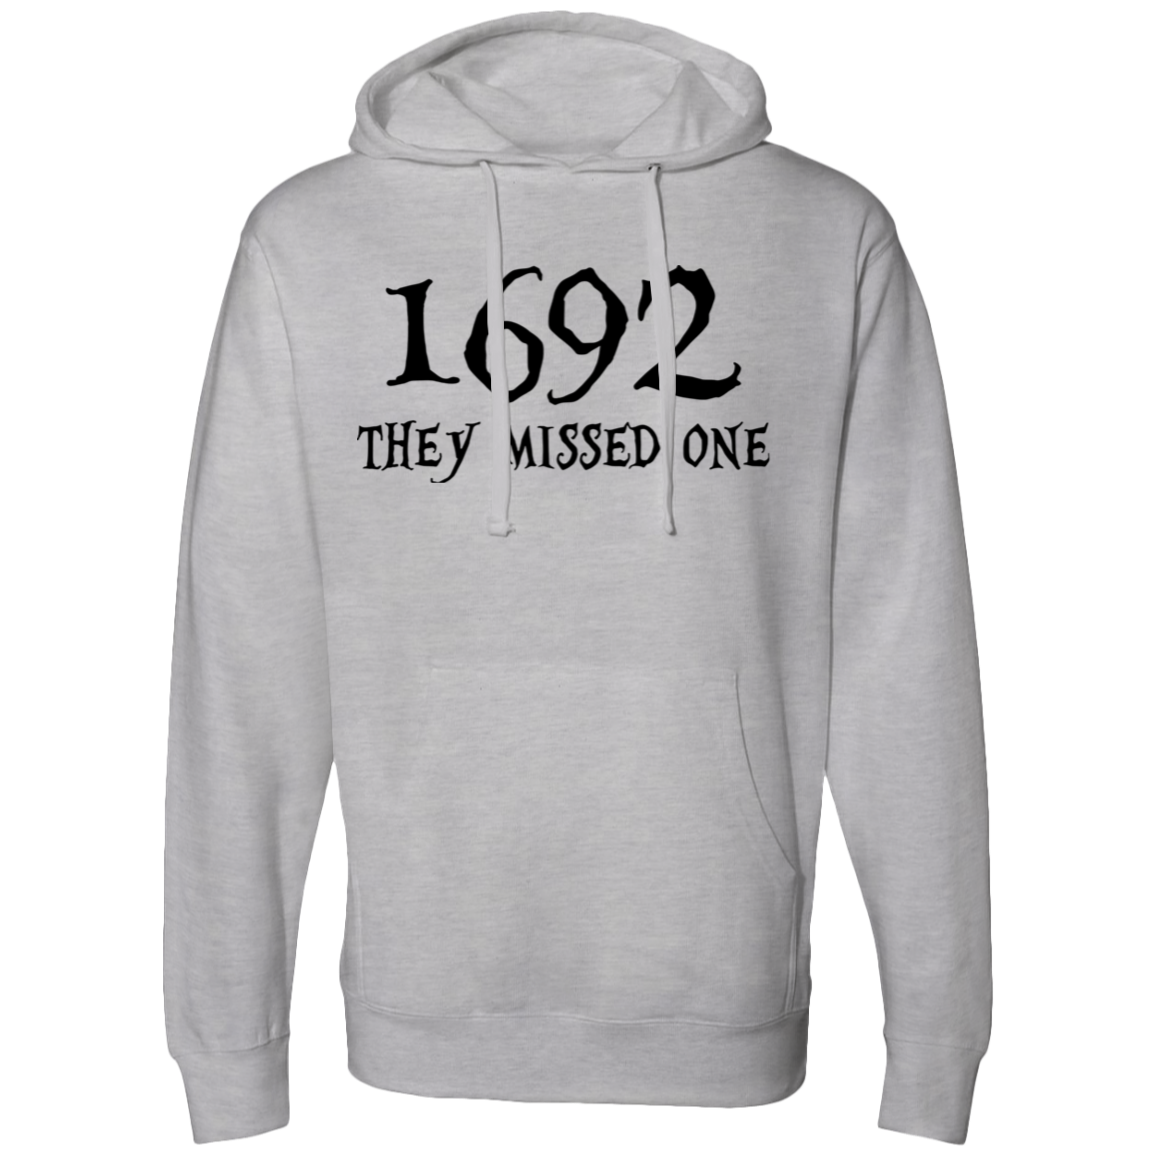 1692 They Missed One SS4500 Midweight Hooded Sweatshirt